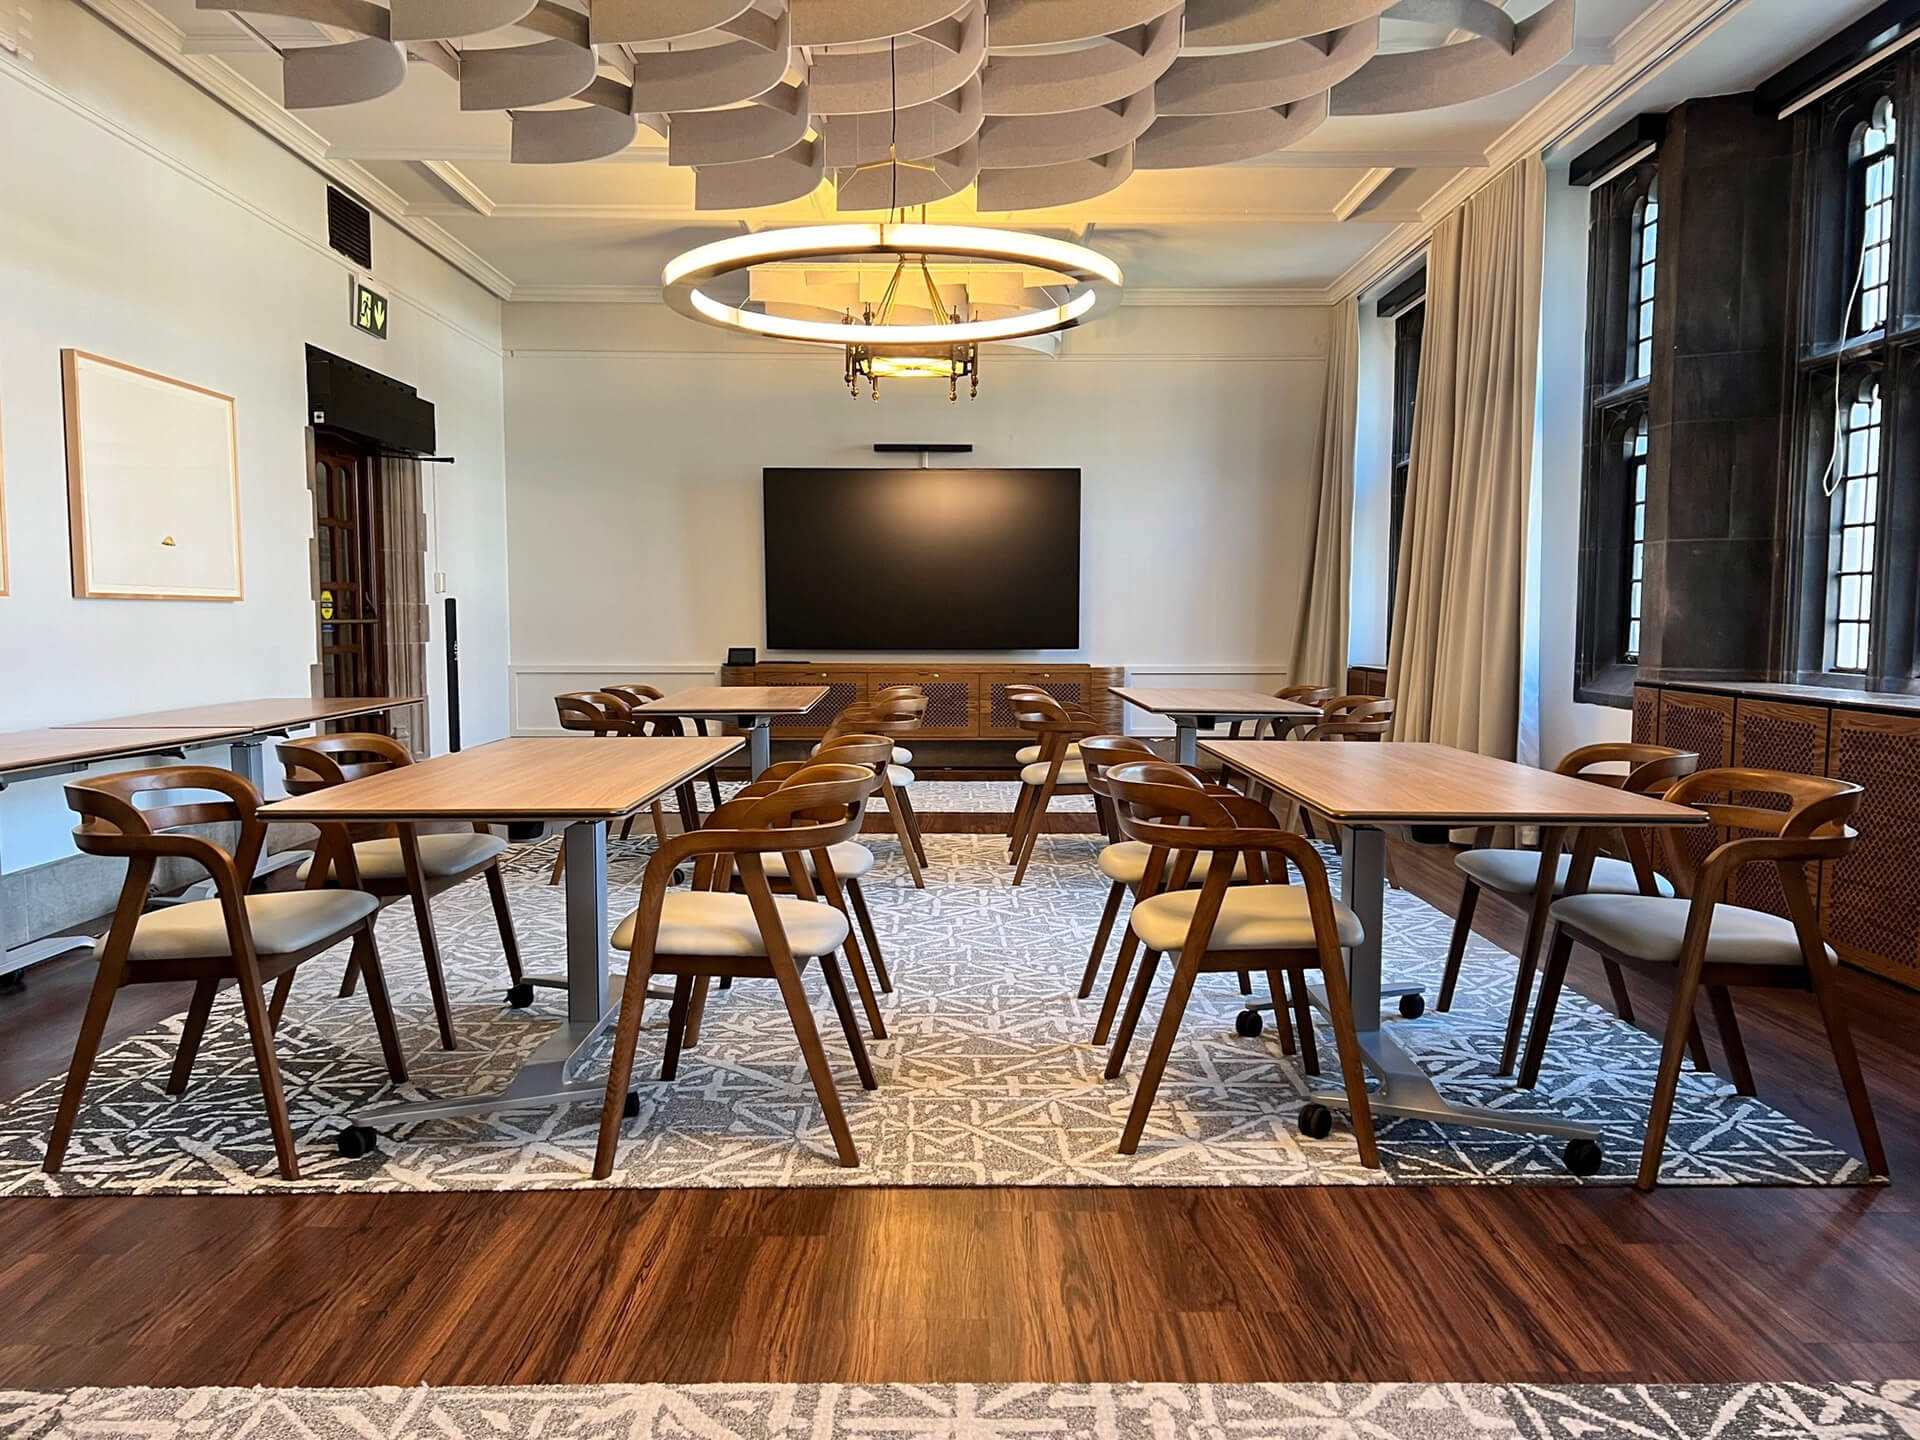 Fully renovated room with tables set for meetings, an interactive screen and sound technology